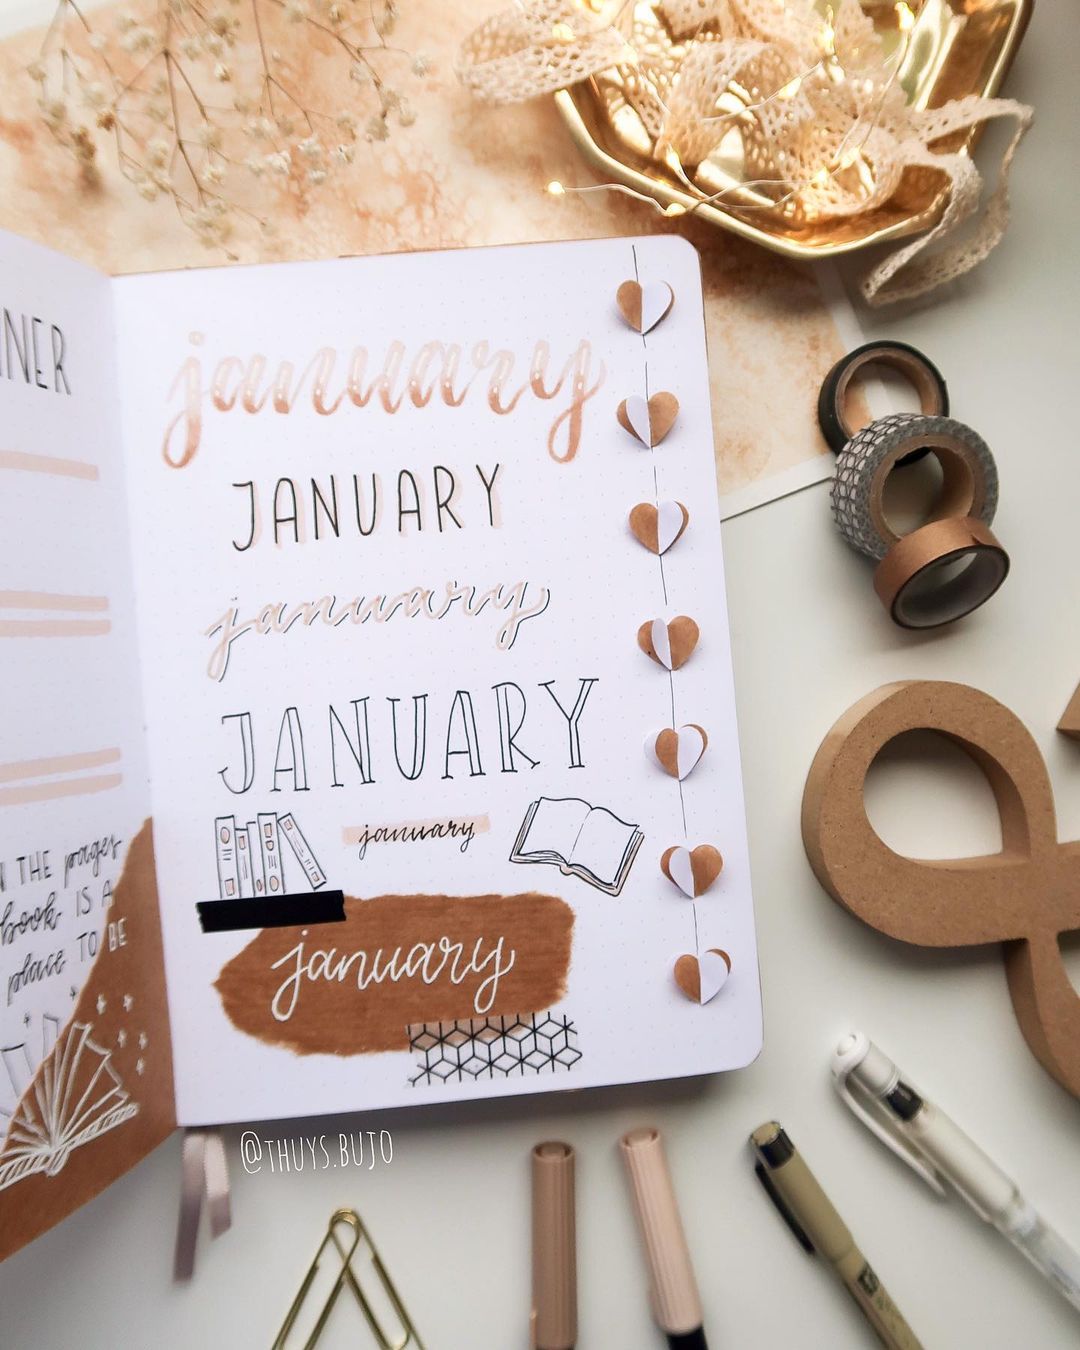 TOP 40+ FREE Bullet Journal Printables for SERIOUS BUJO FANS